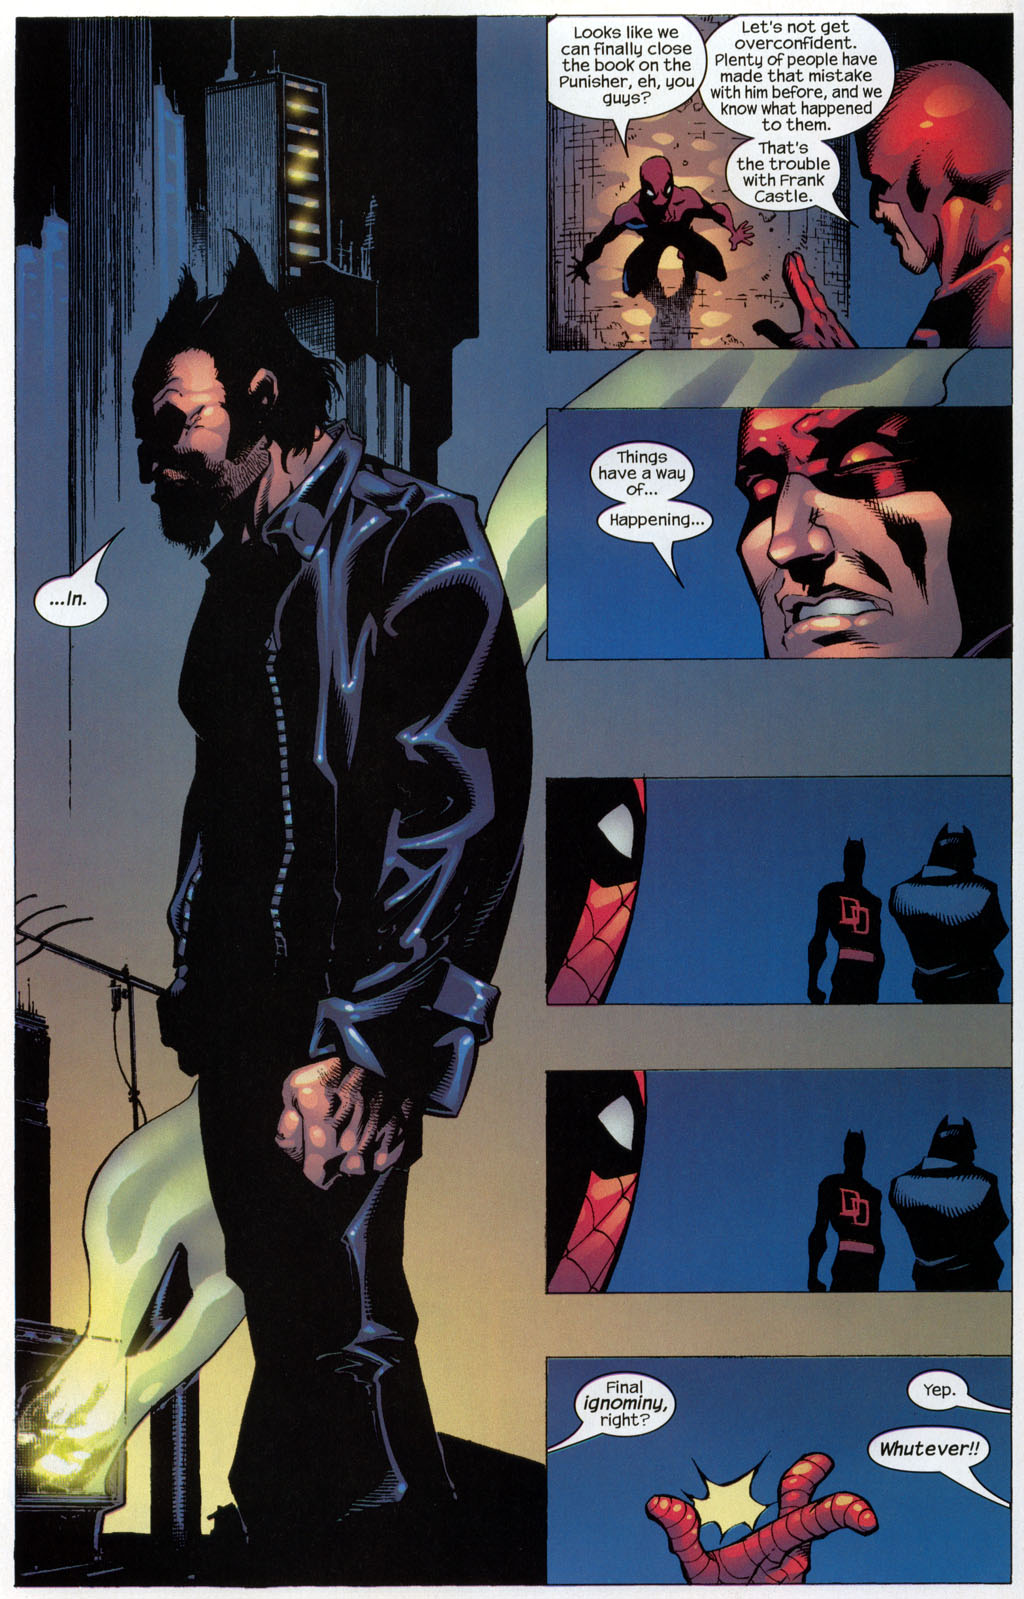 The Punisher (2001) issue 33 - Confederacy of Dunces #01 - Page 7